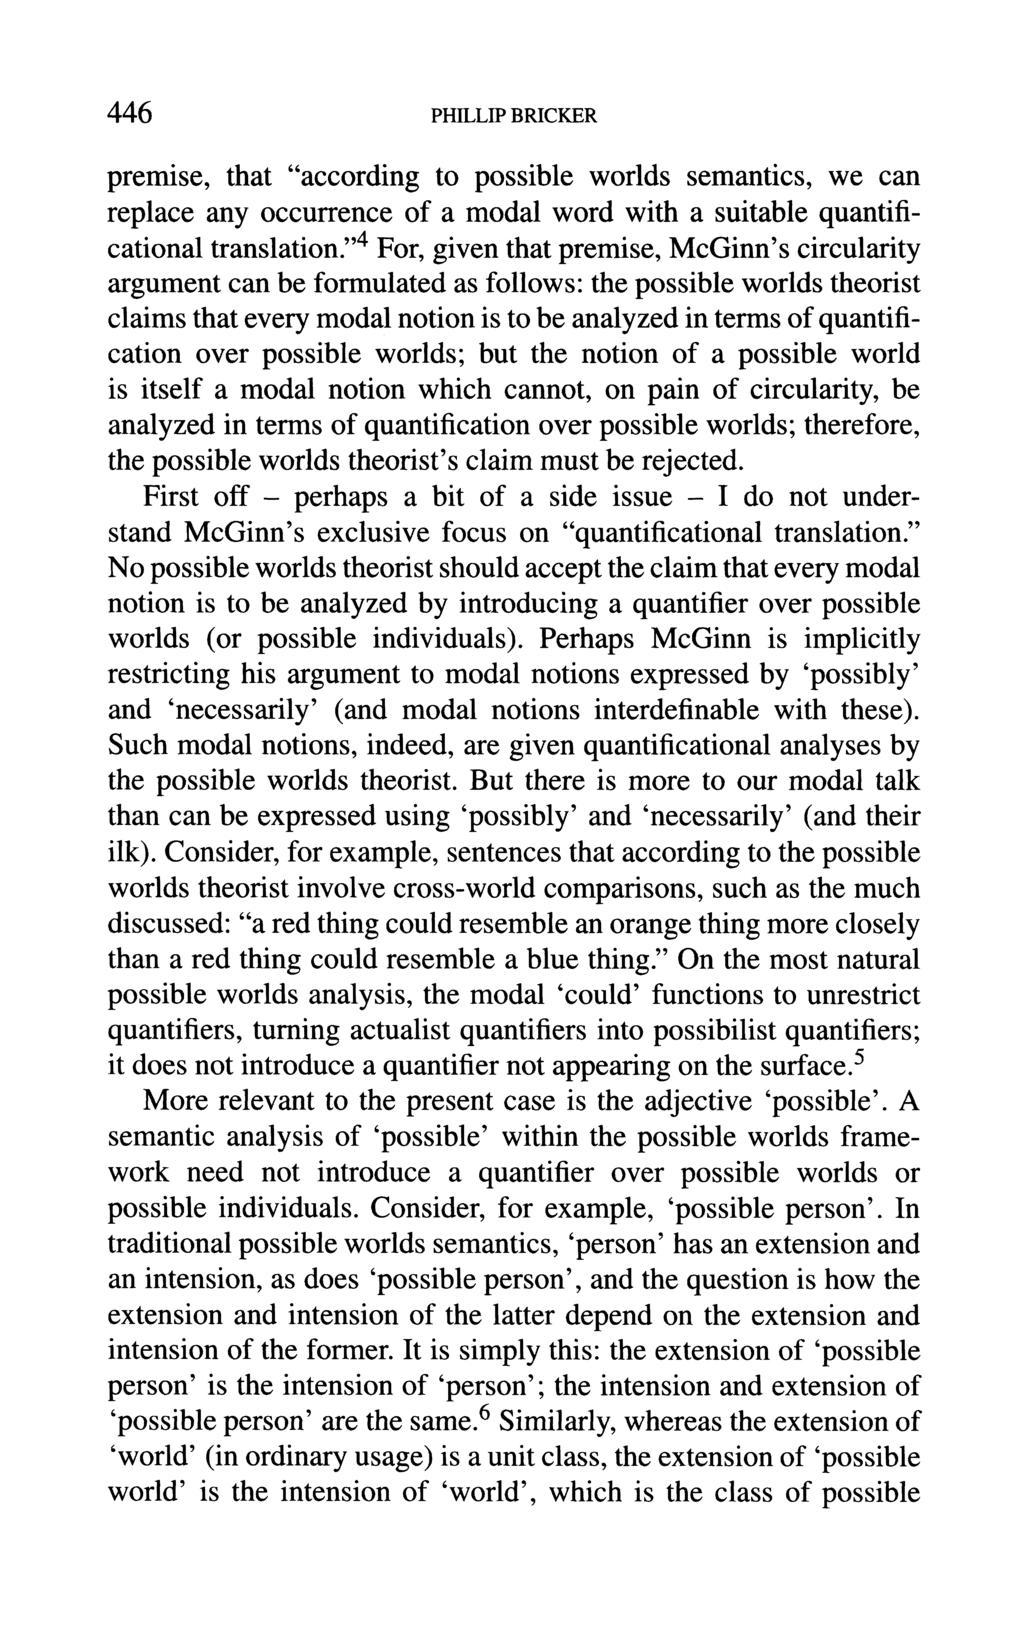 446 PHILLIP BRICKER premise, that "according to possible worlds semantics, we can replace any occurrence of a modal word with a suitable quantificational translation.